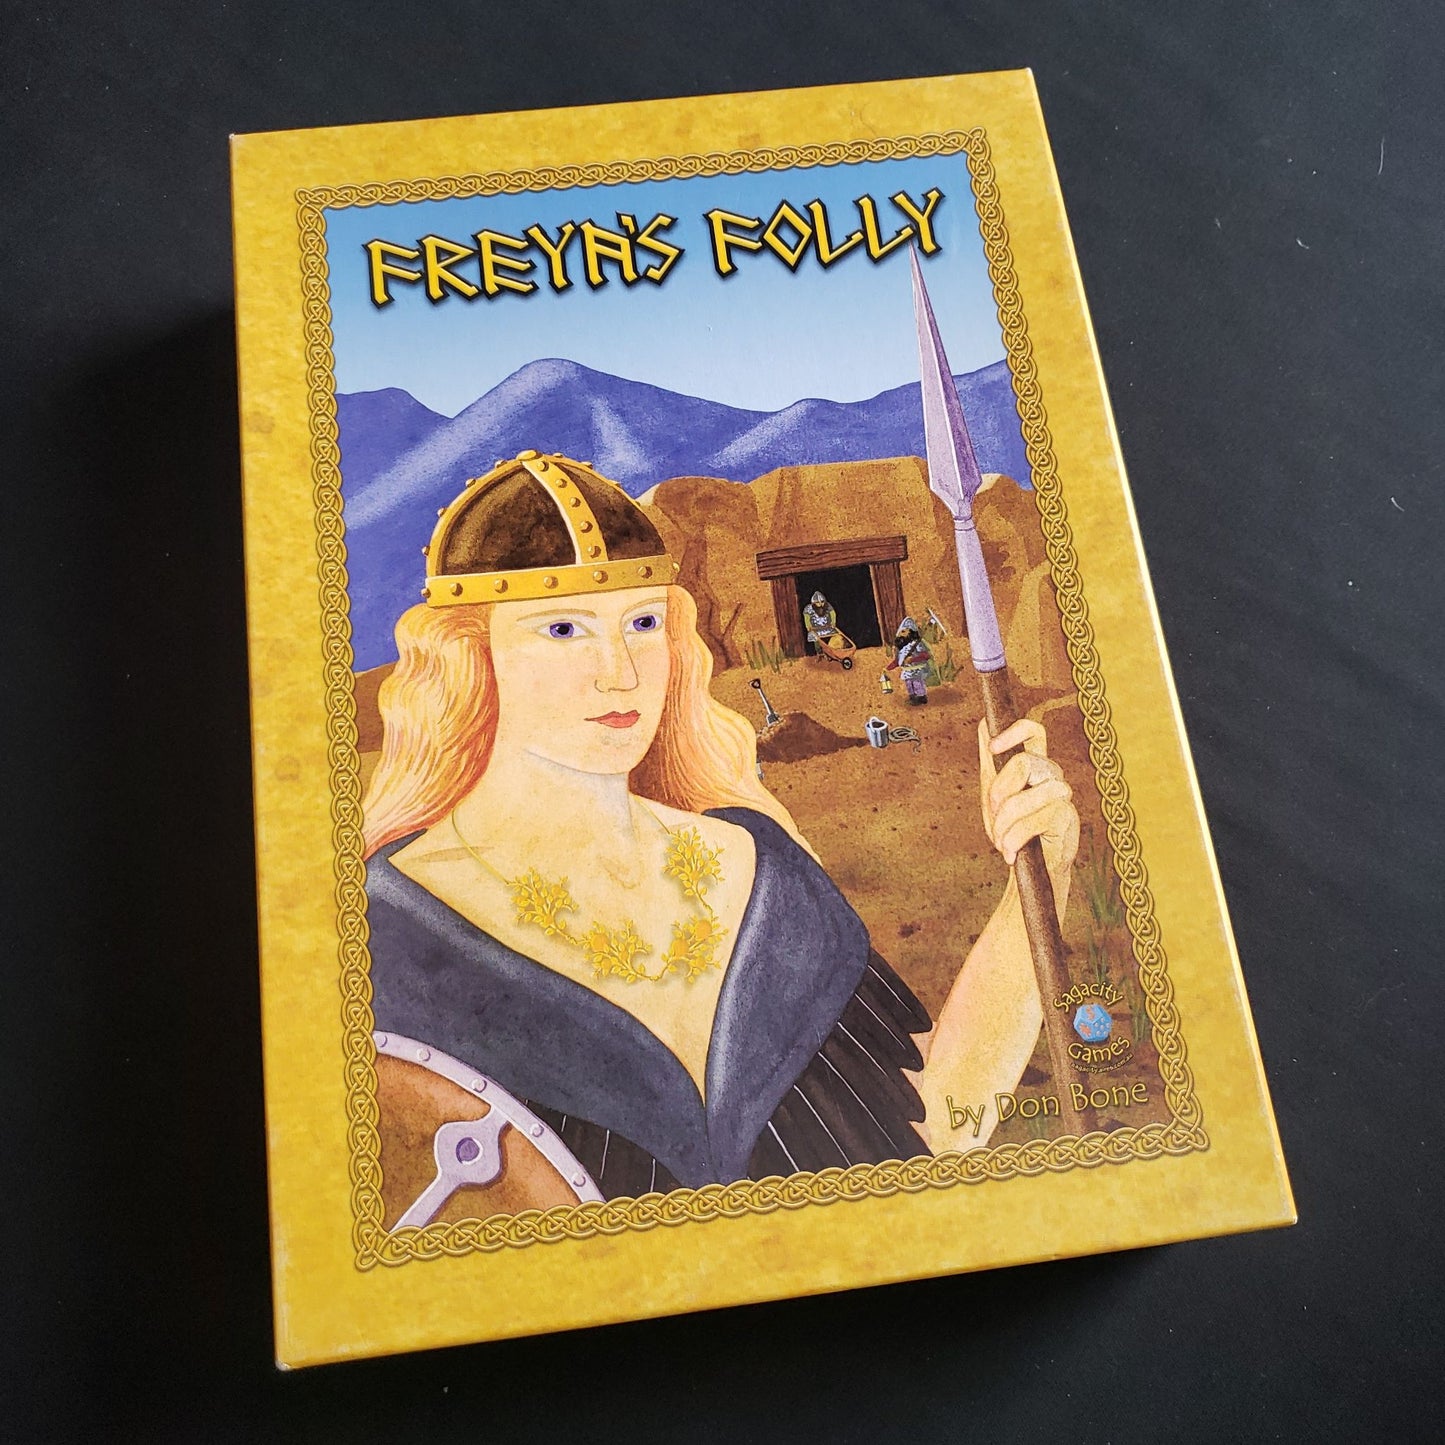 Image shows the front cover of the box of the Freya's Folly board game